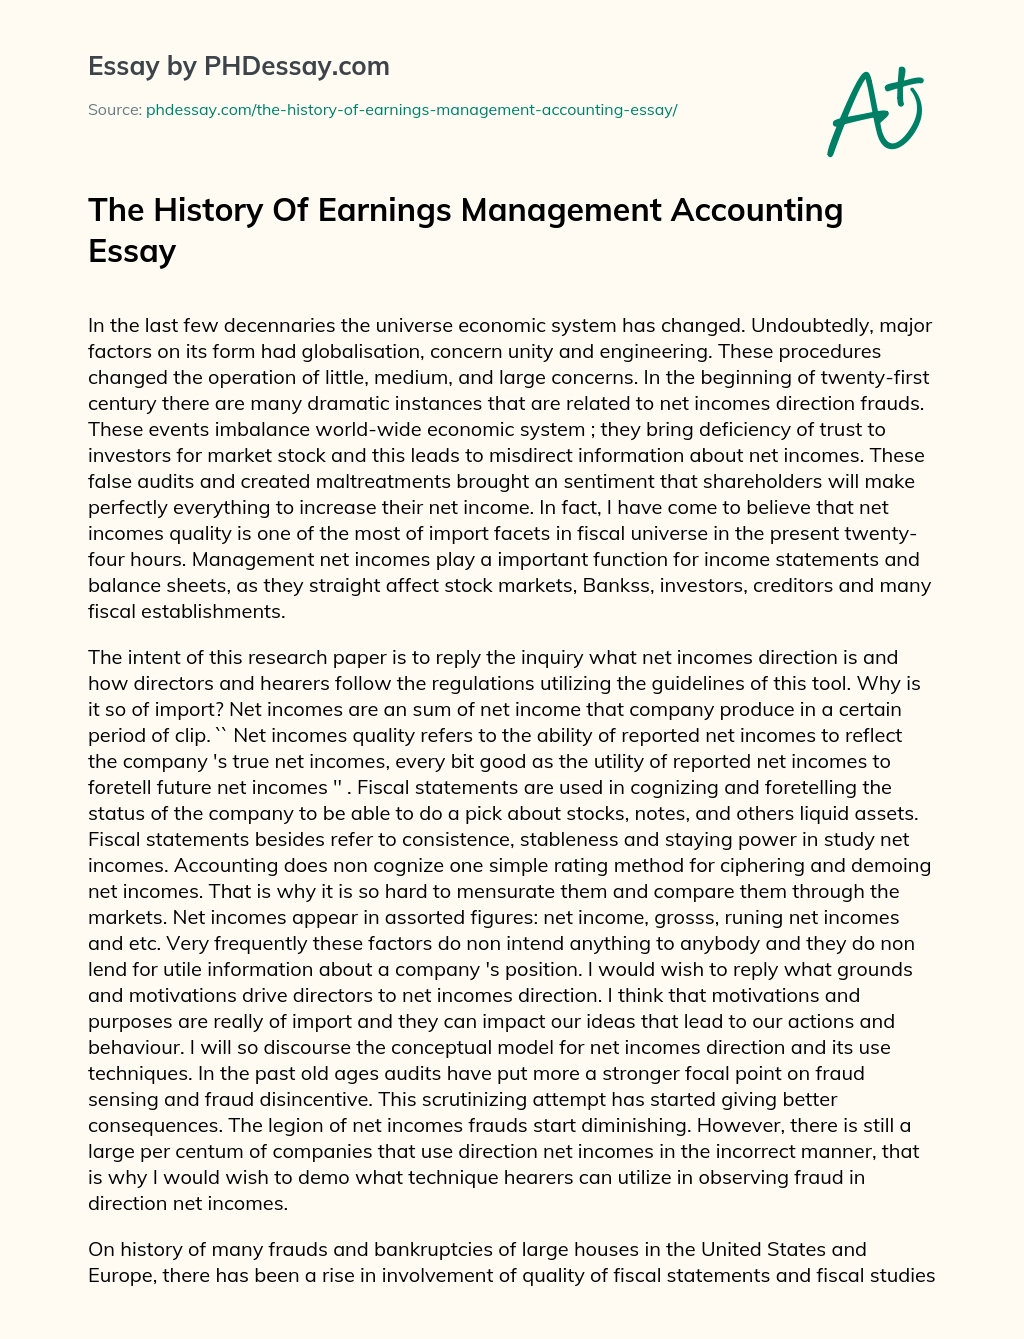 The History Of Earnings Management Accounting Essay essay